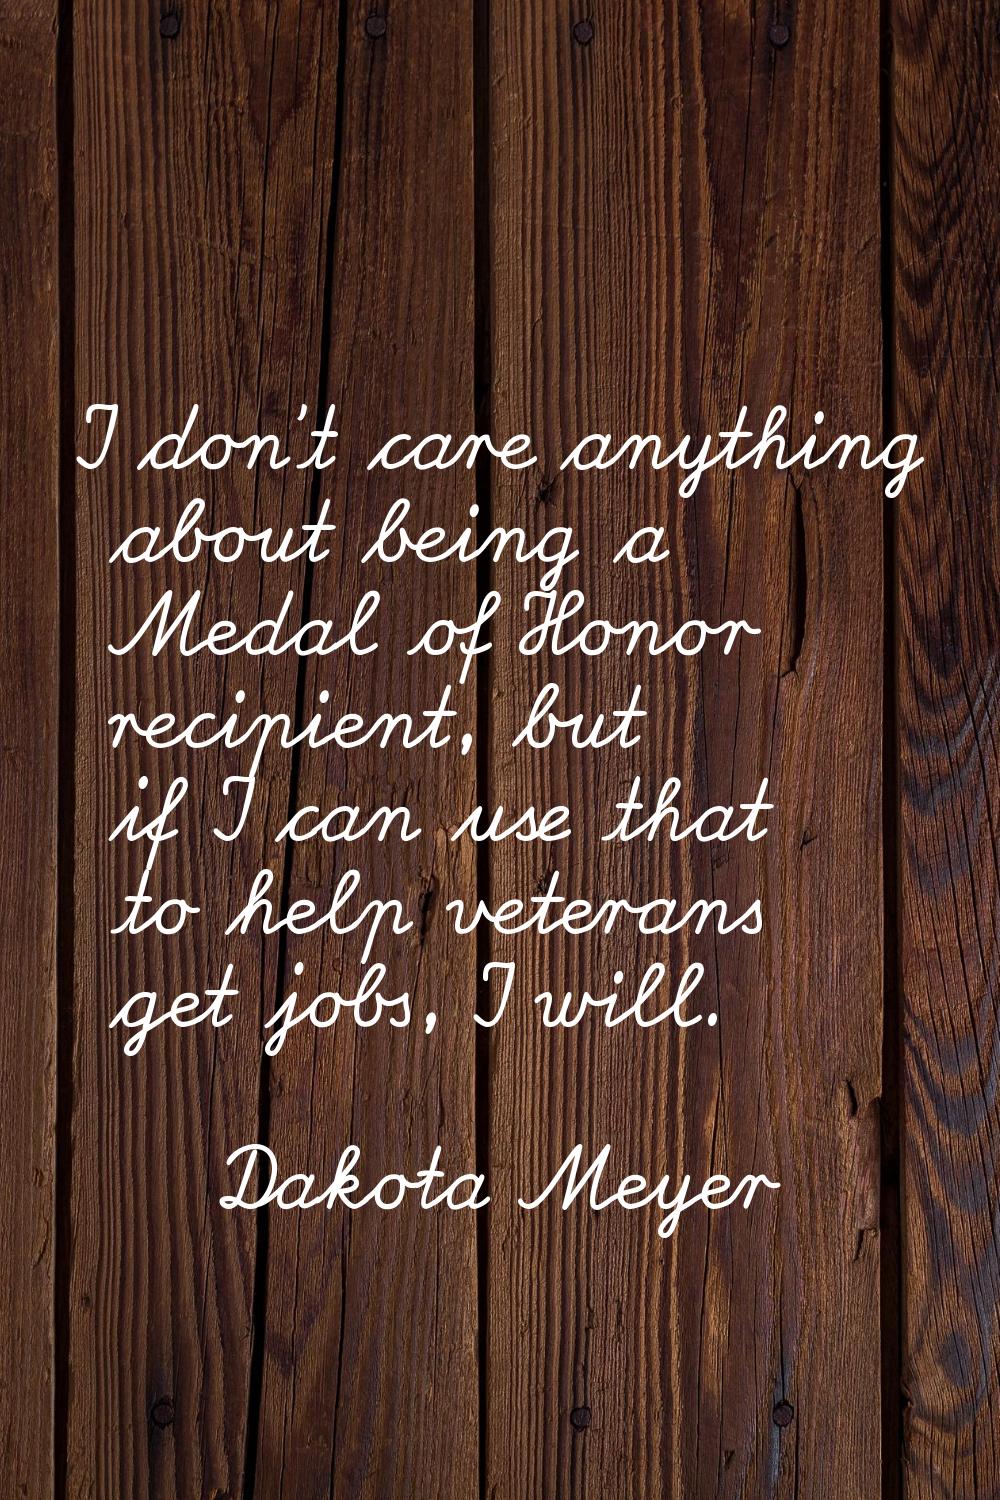 I don't care anything about being a Medal of Honor recipient, but if I can use that to help veteran